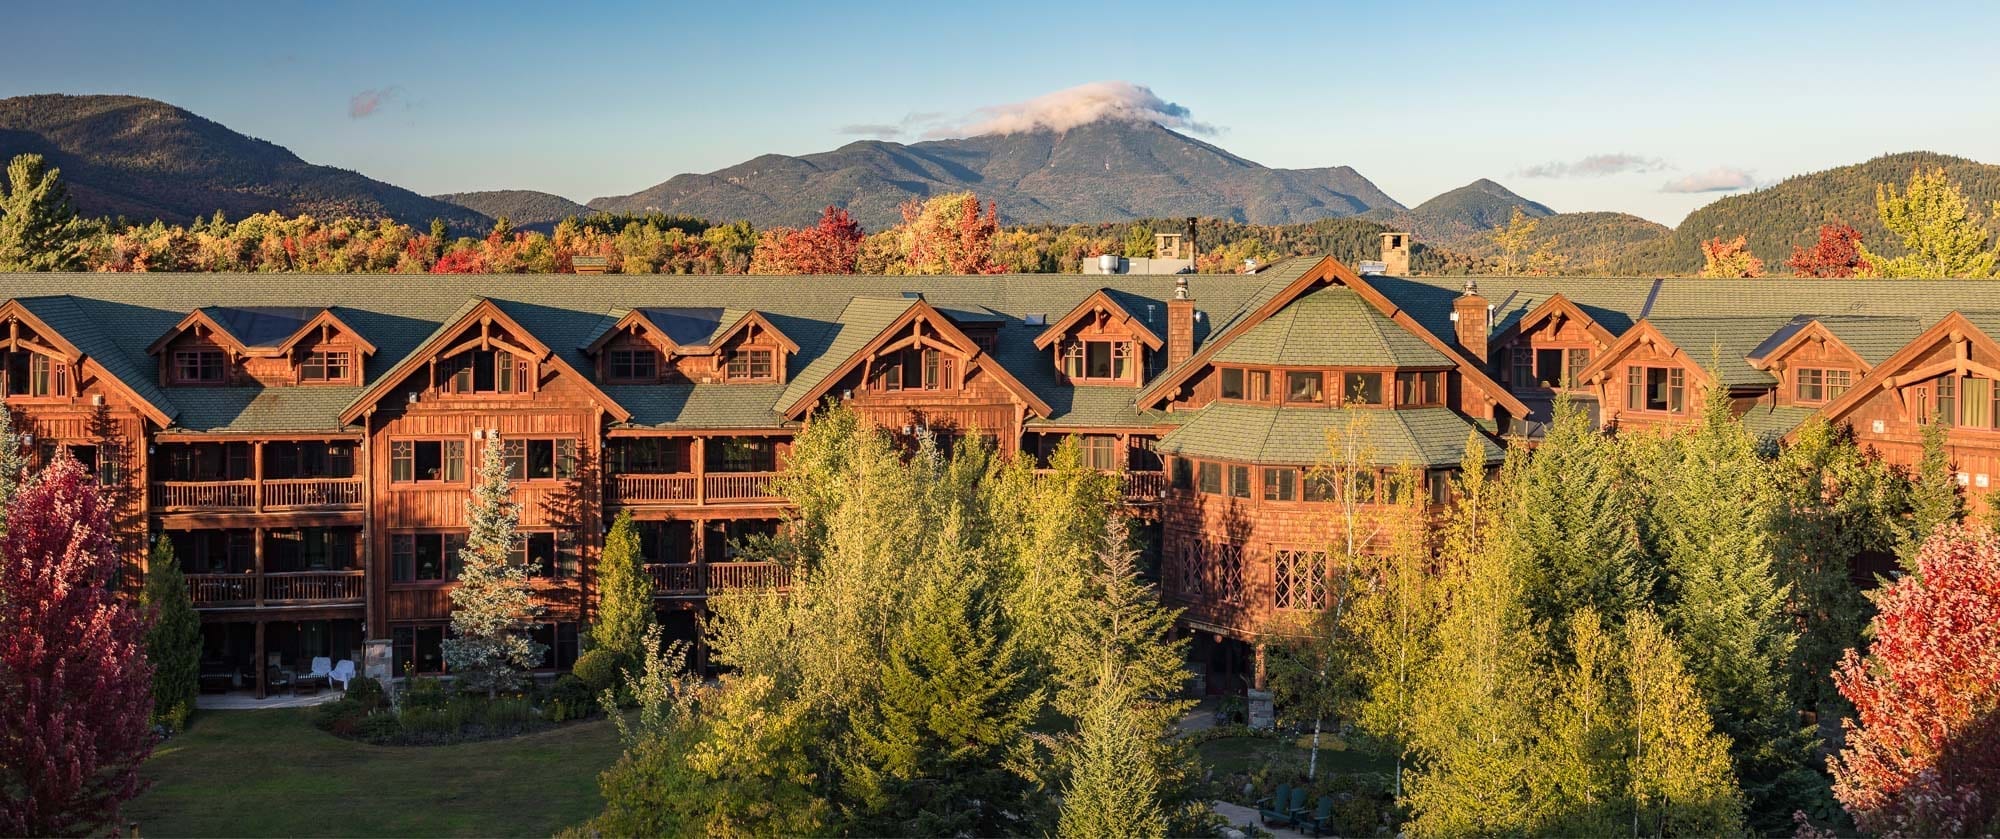 Whiteface Lodge and hills in autumn.